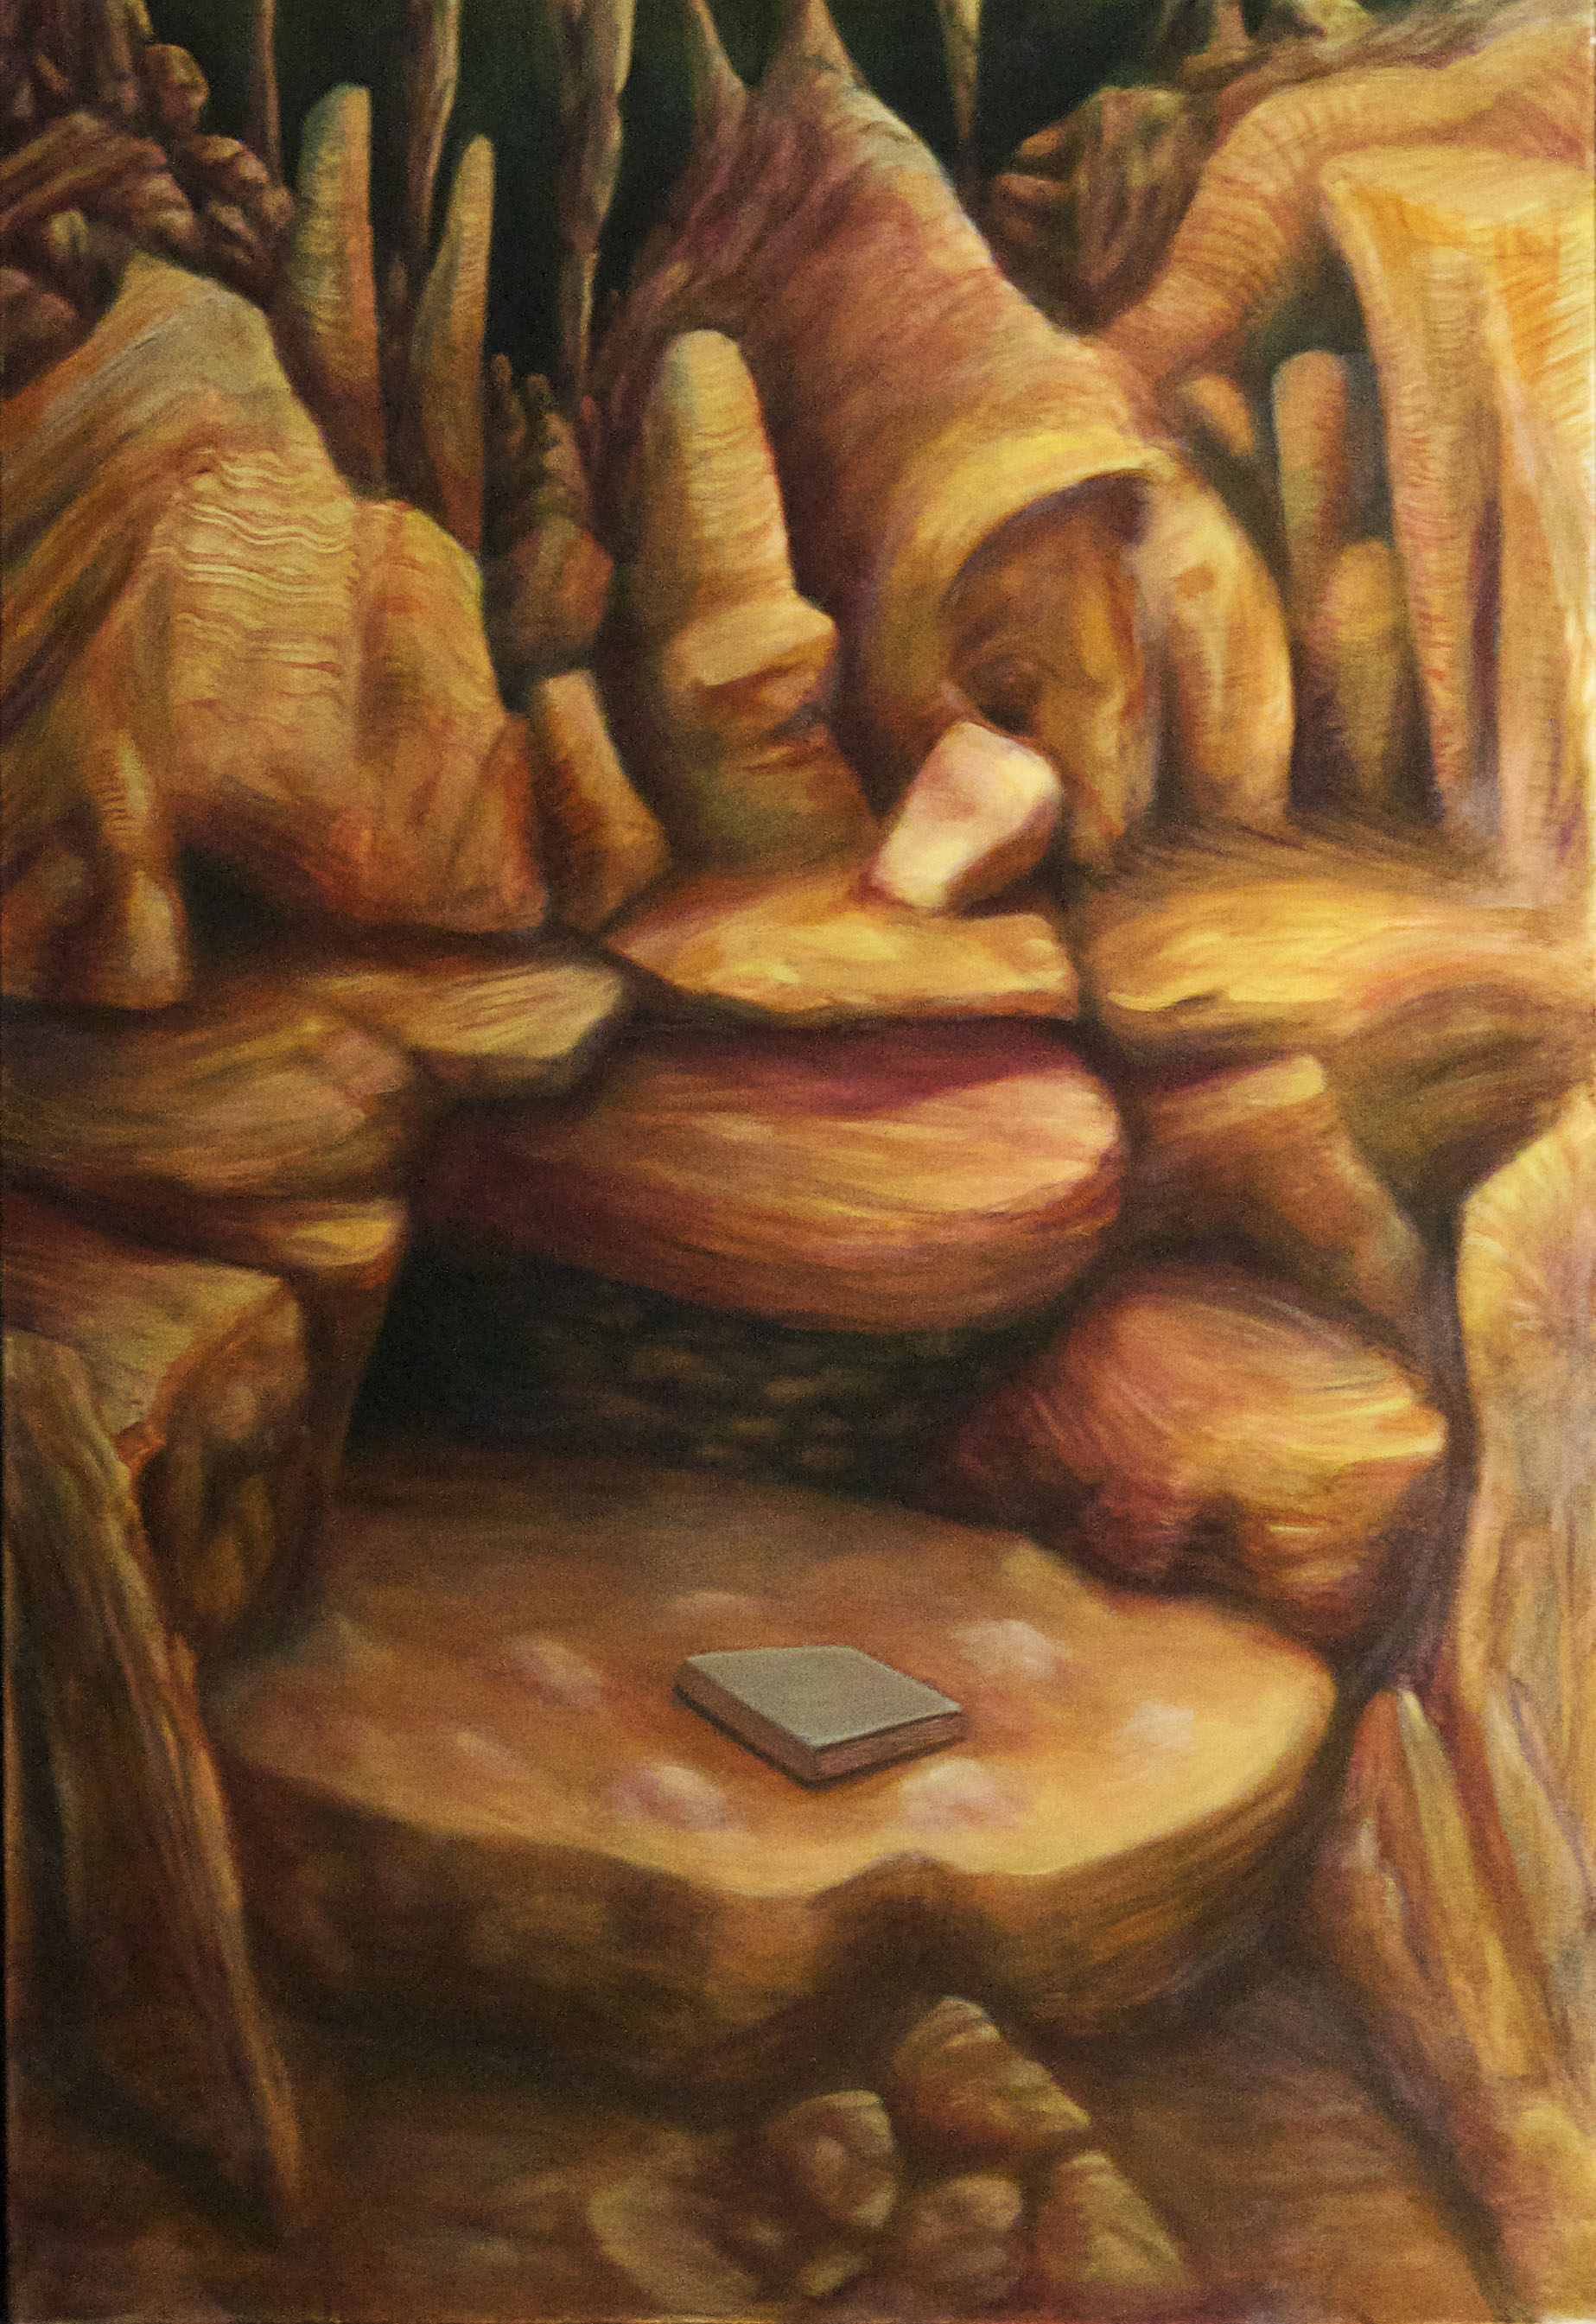 Whole. Oil on Canvas. 48x72 in. 2015.